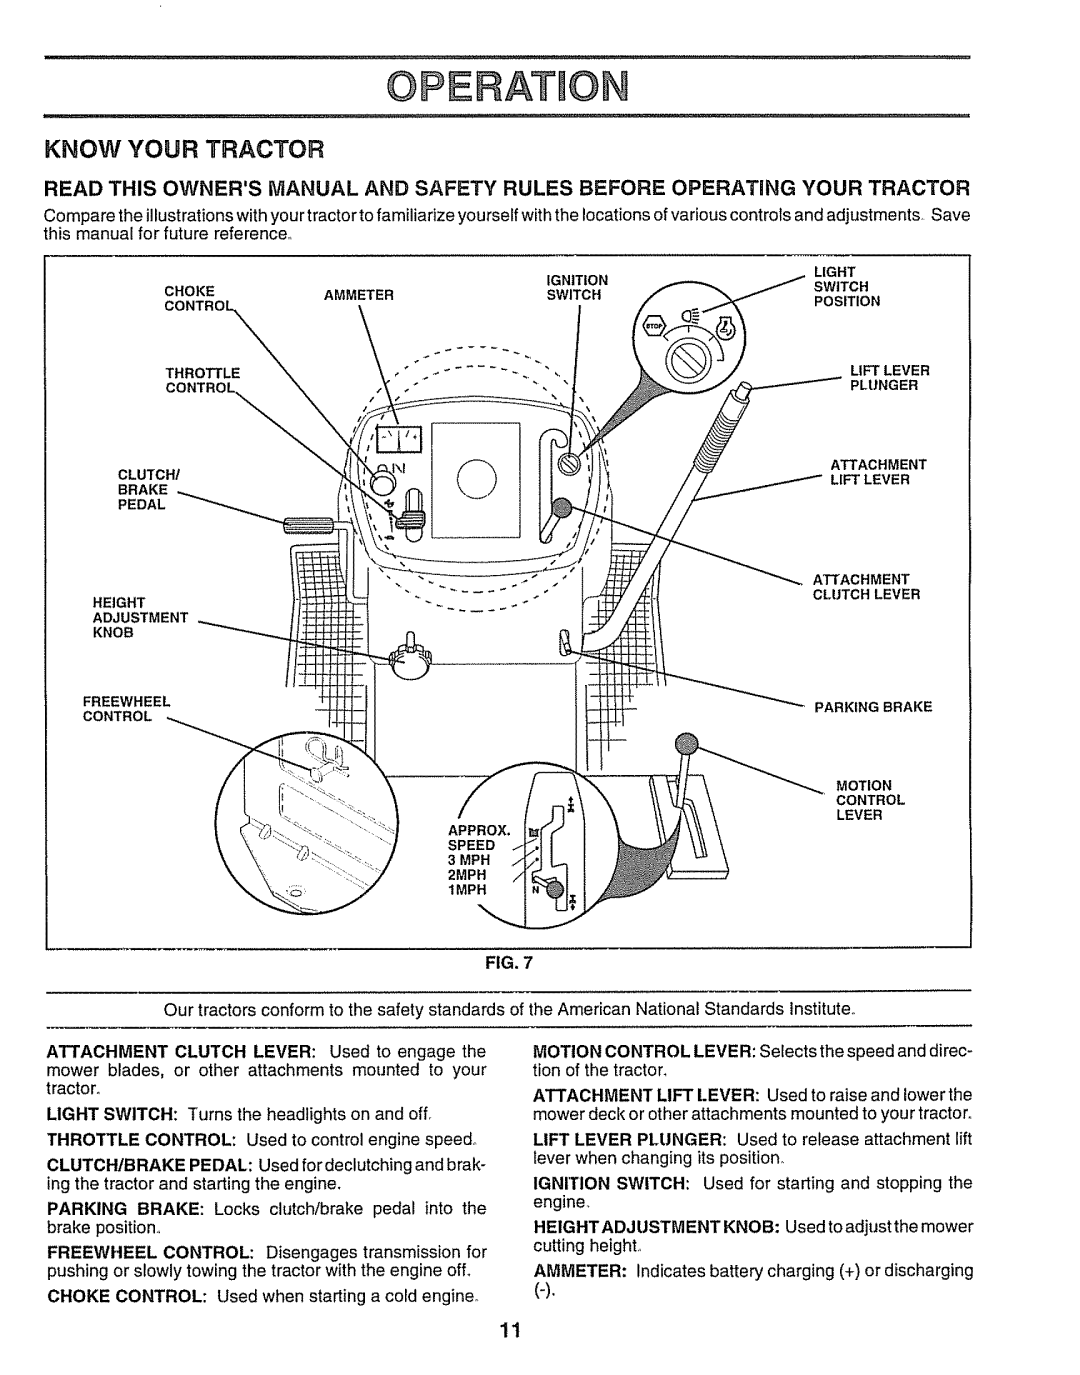 Craftsman 917.259172 manual OPERATmON, Know Your Tractor 